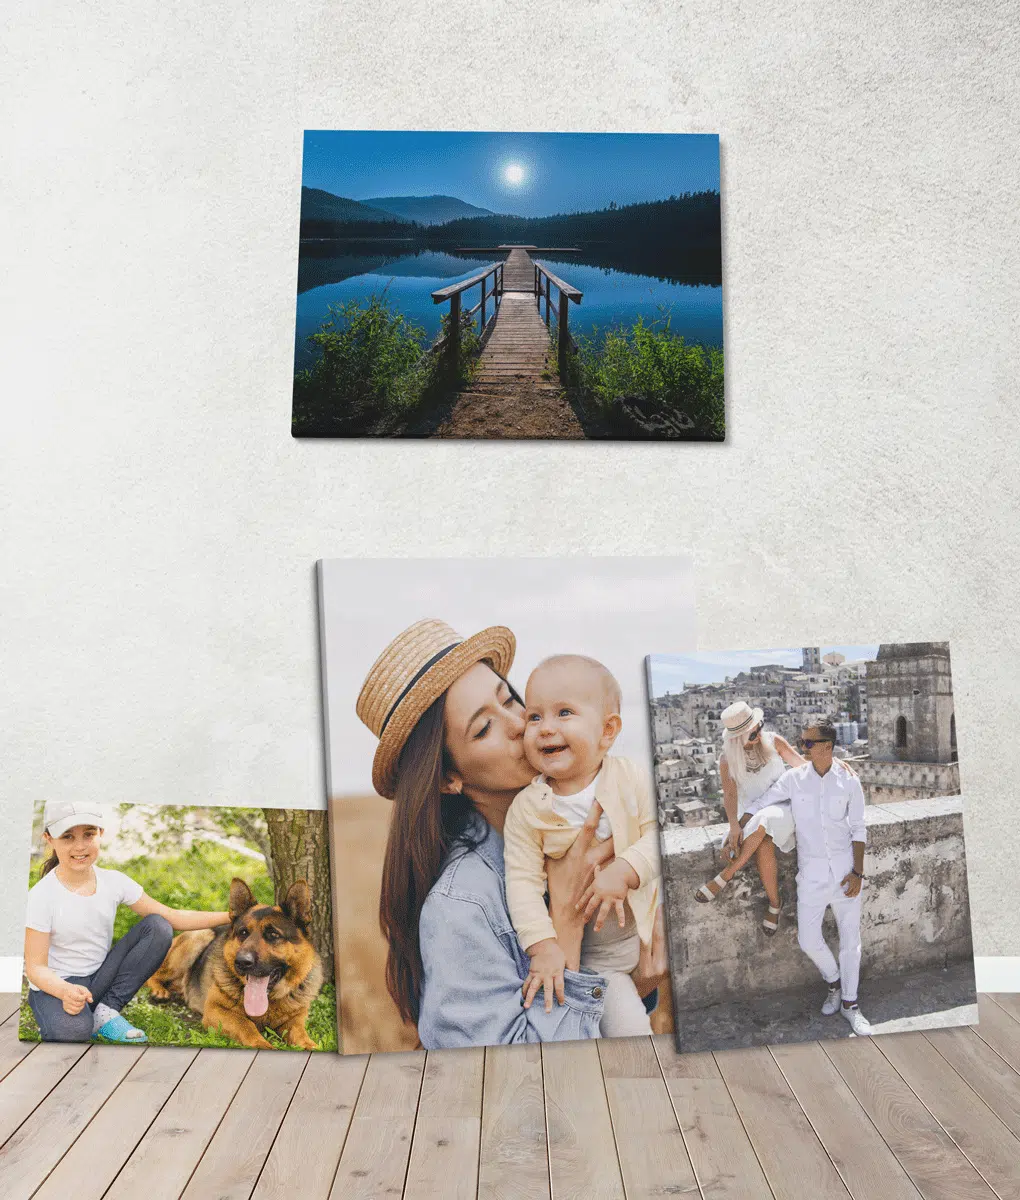 MR & MRS – Personalised Newly Wed Photo Frame Gift Gifts For Couples